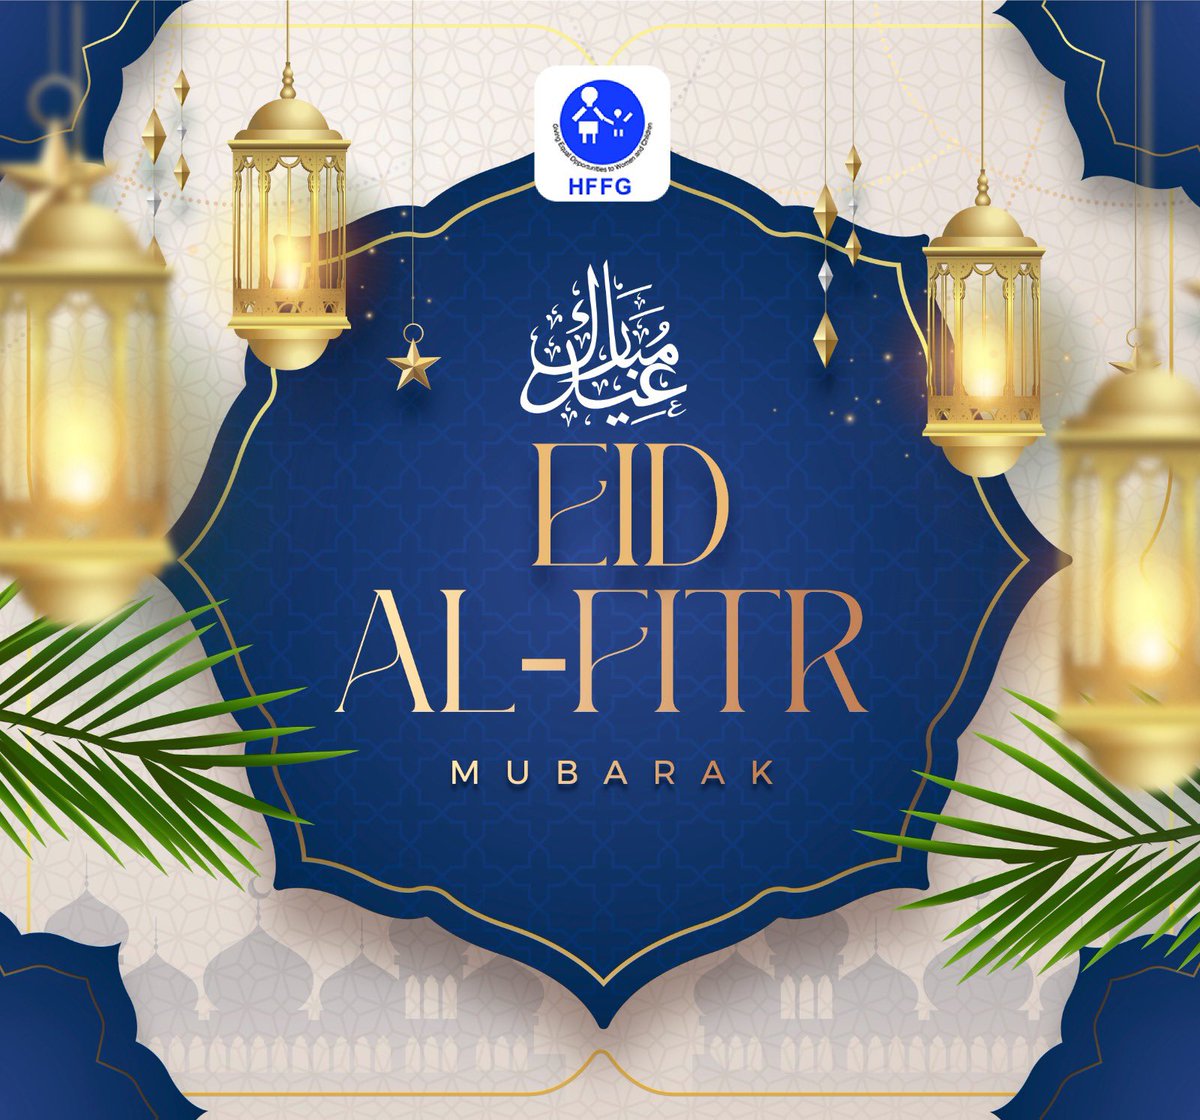 May this Eid-ul-Fitr be a very blessed, joyous and memorable celebration for all.